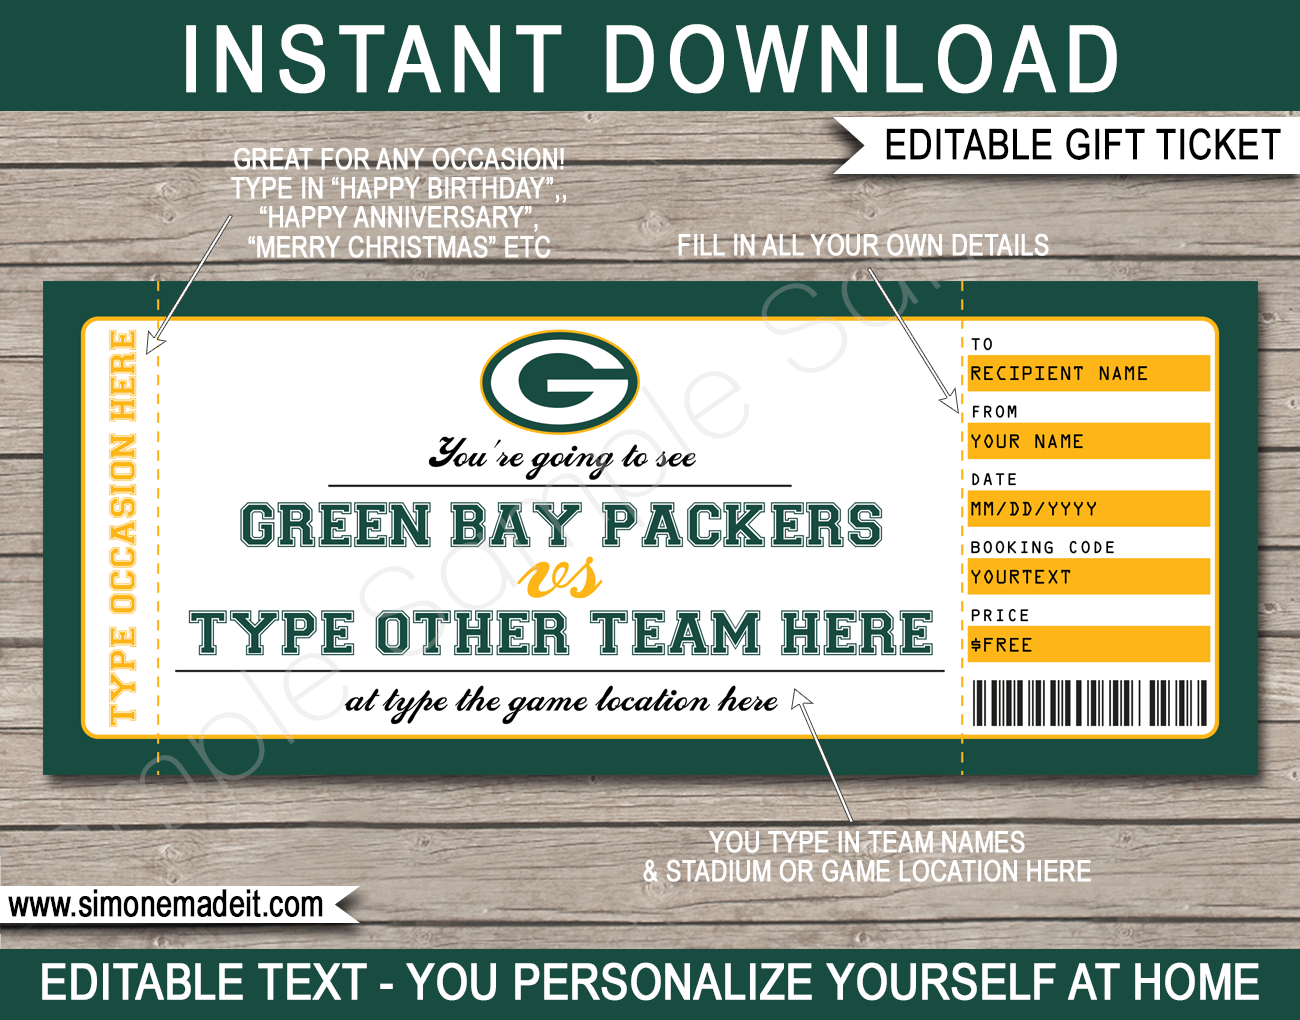 Green Bay Packers Game Ticket Gift Voucher